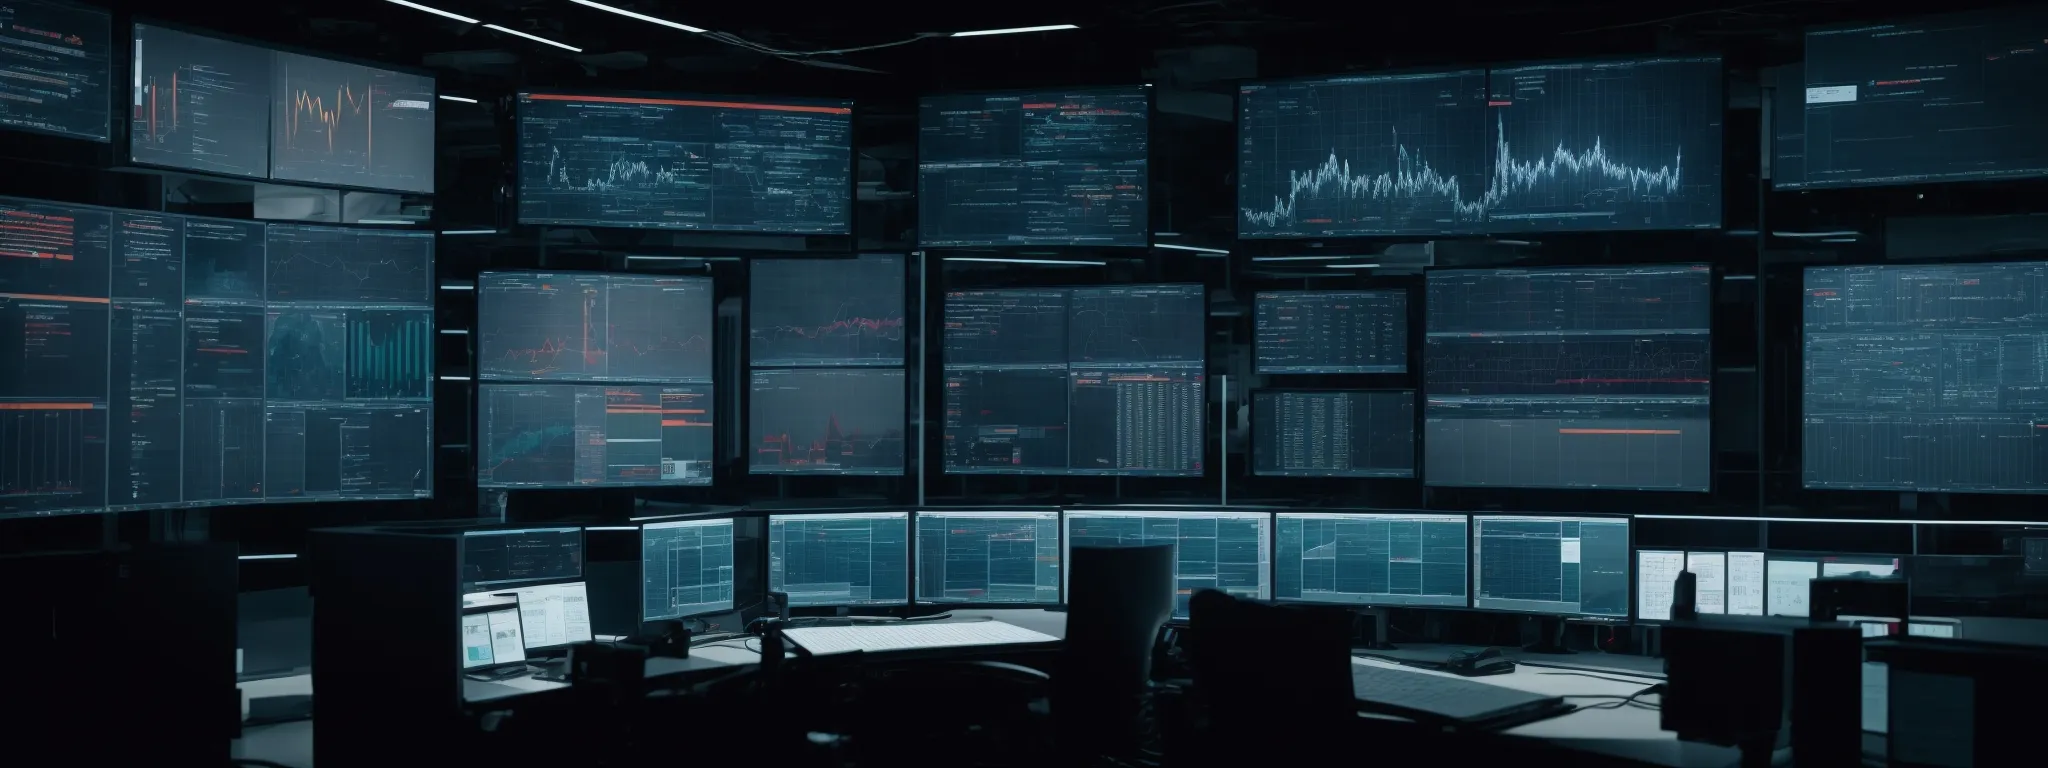 an image showcasing a variety of abstract data visualization screens representing different data management systems within a high-tech control room.